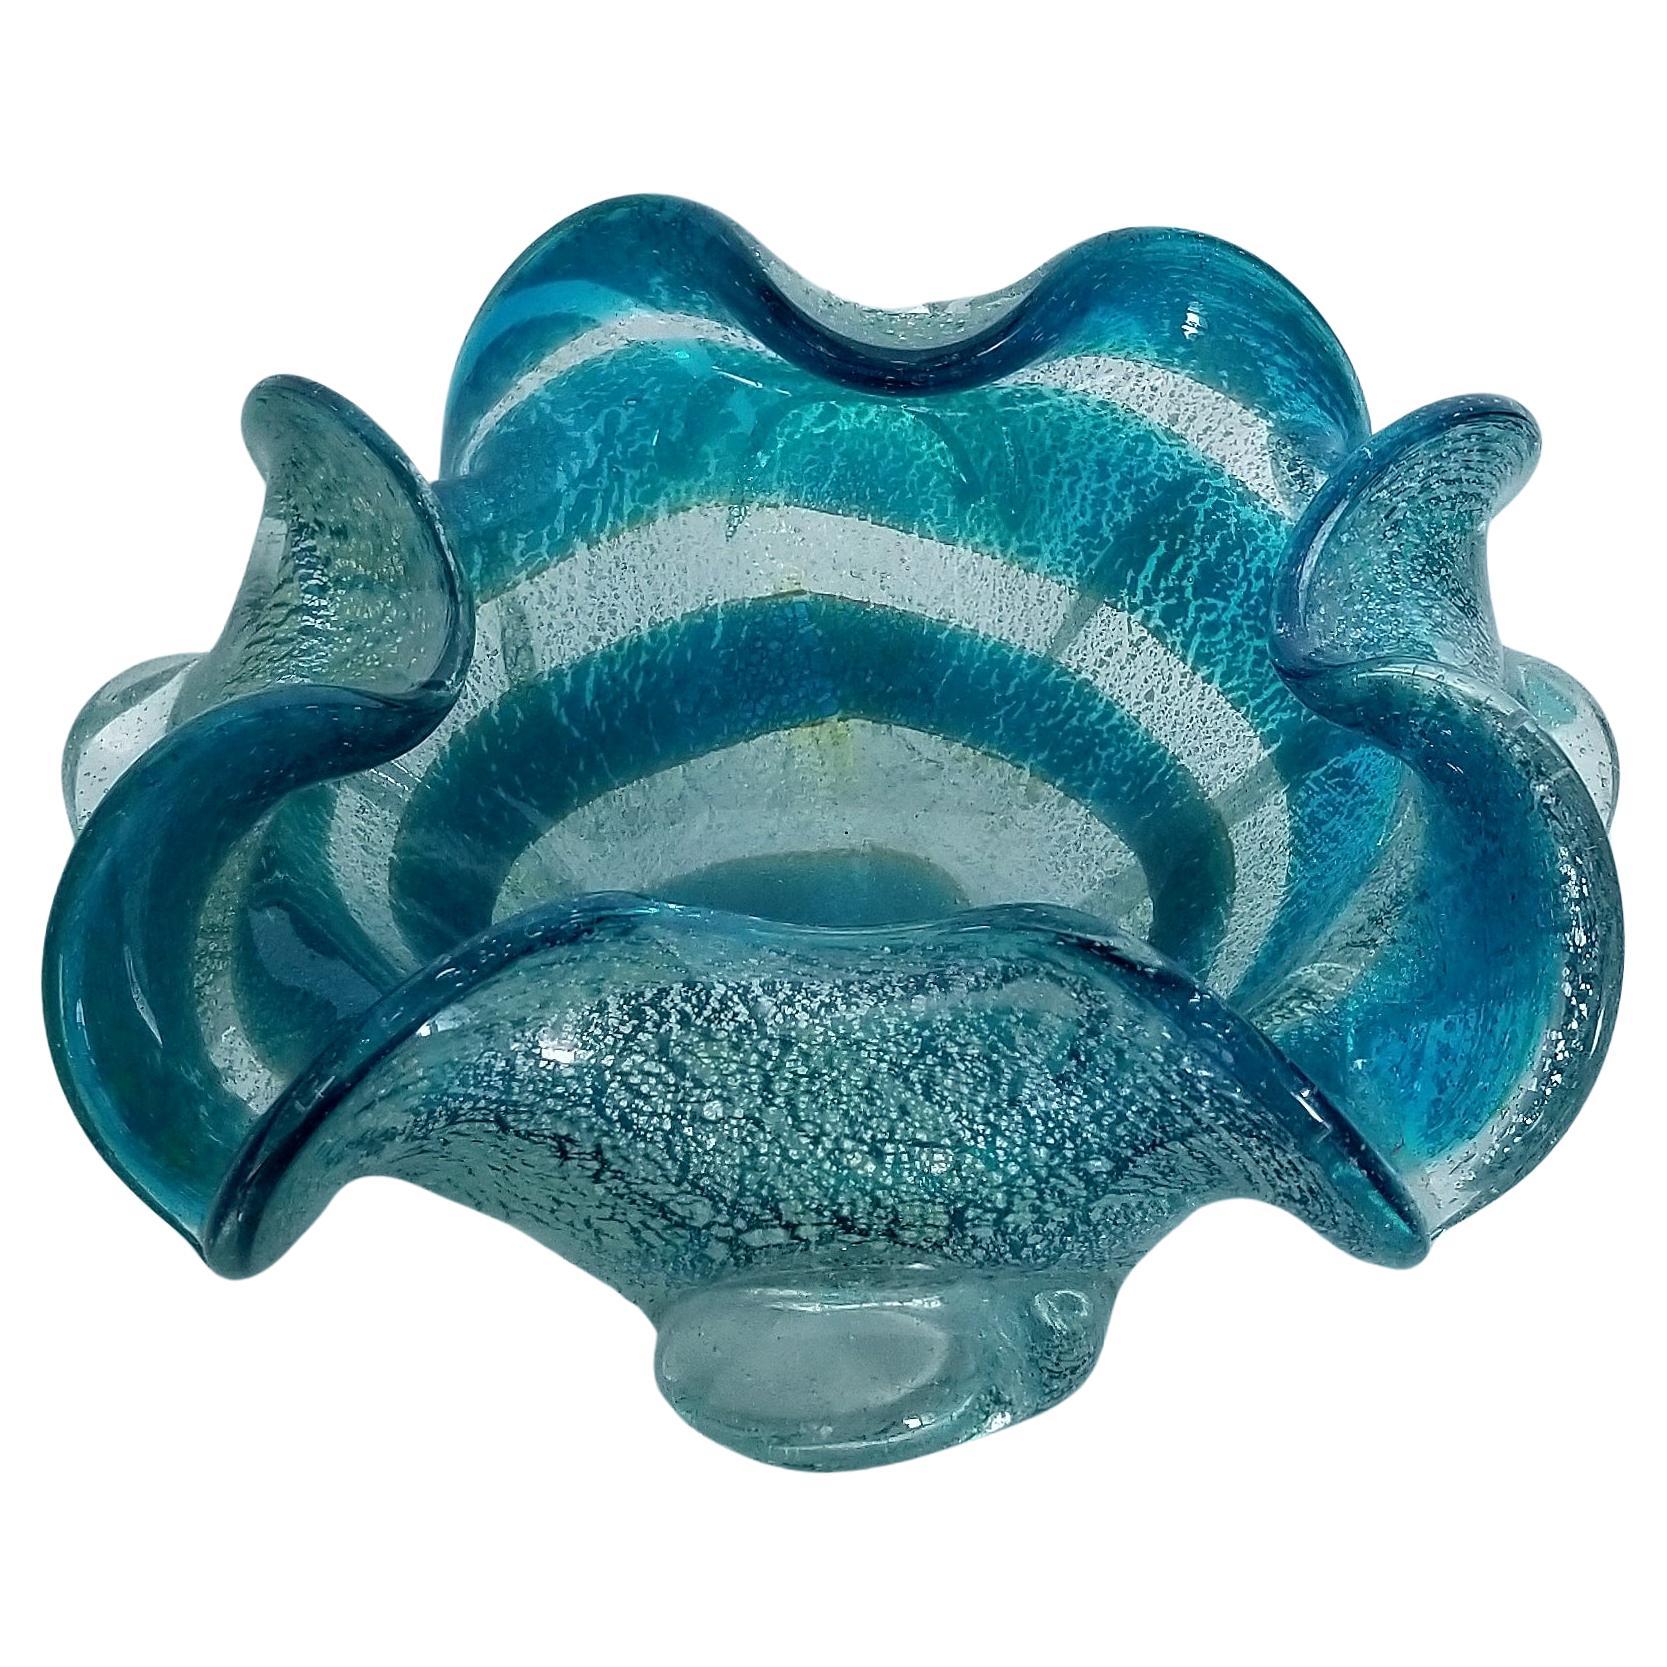 Blue and Silver Murano Glass Ashtray or Catch-all Bowl For Sale 2